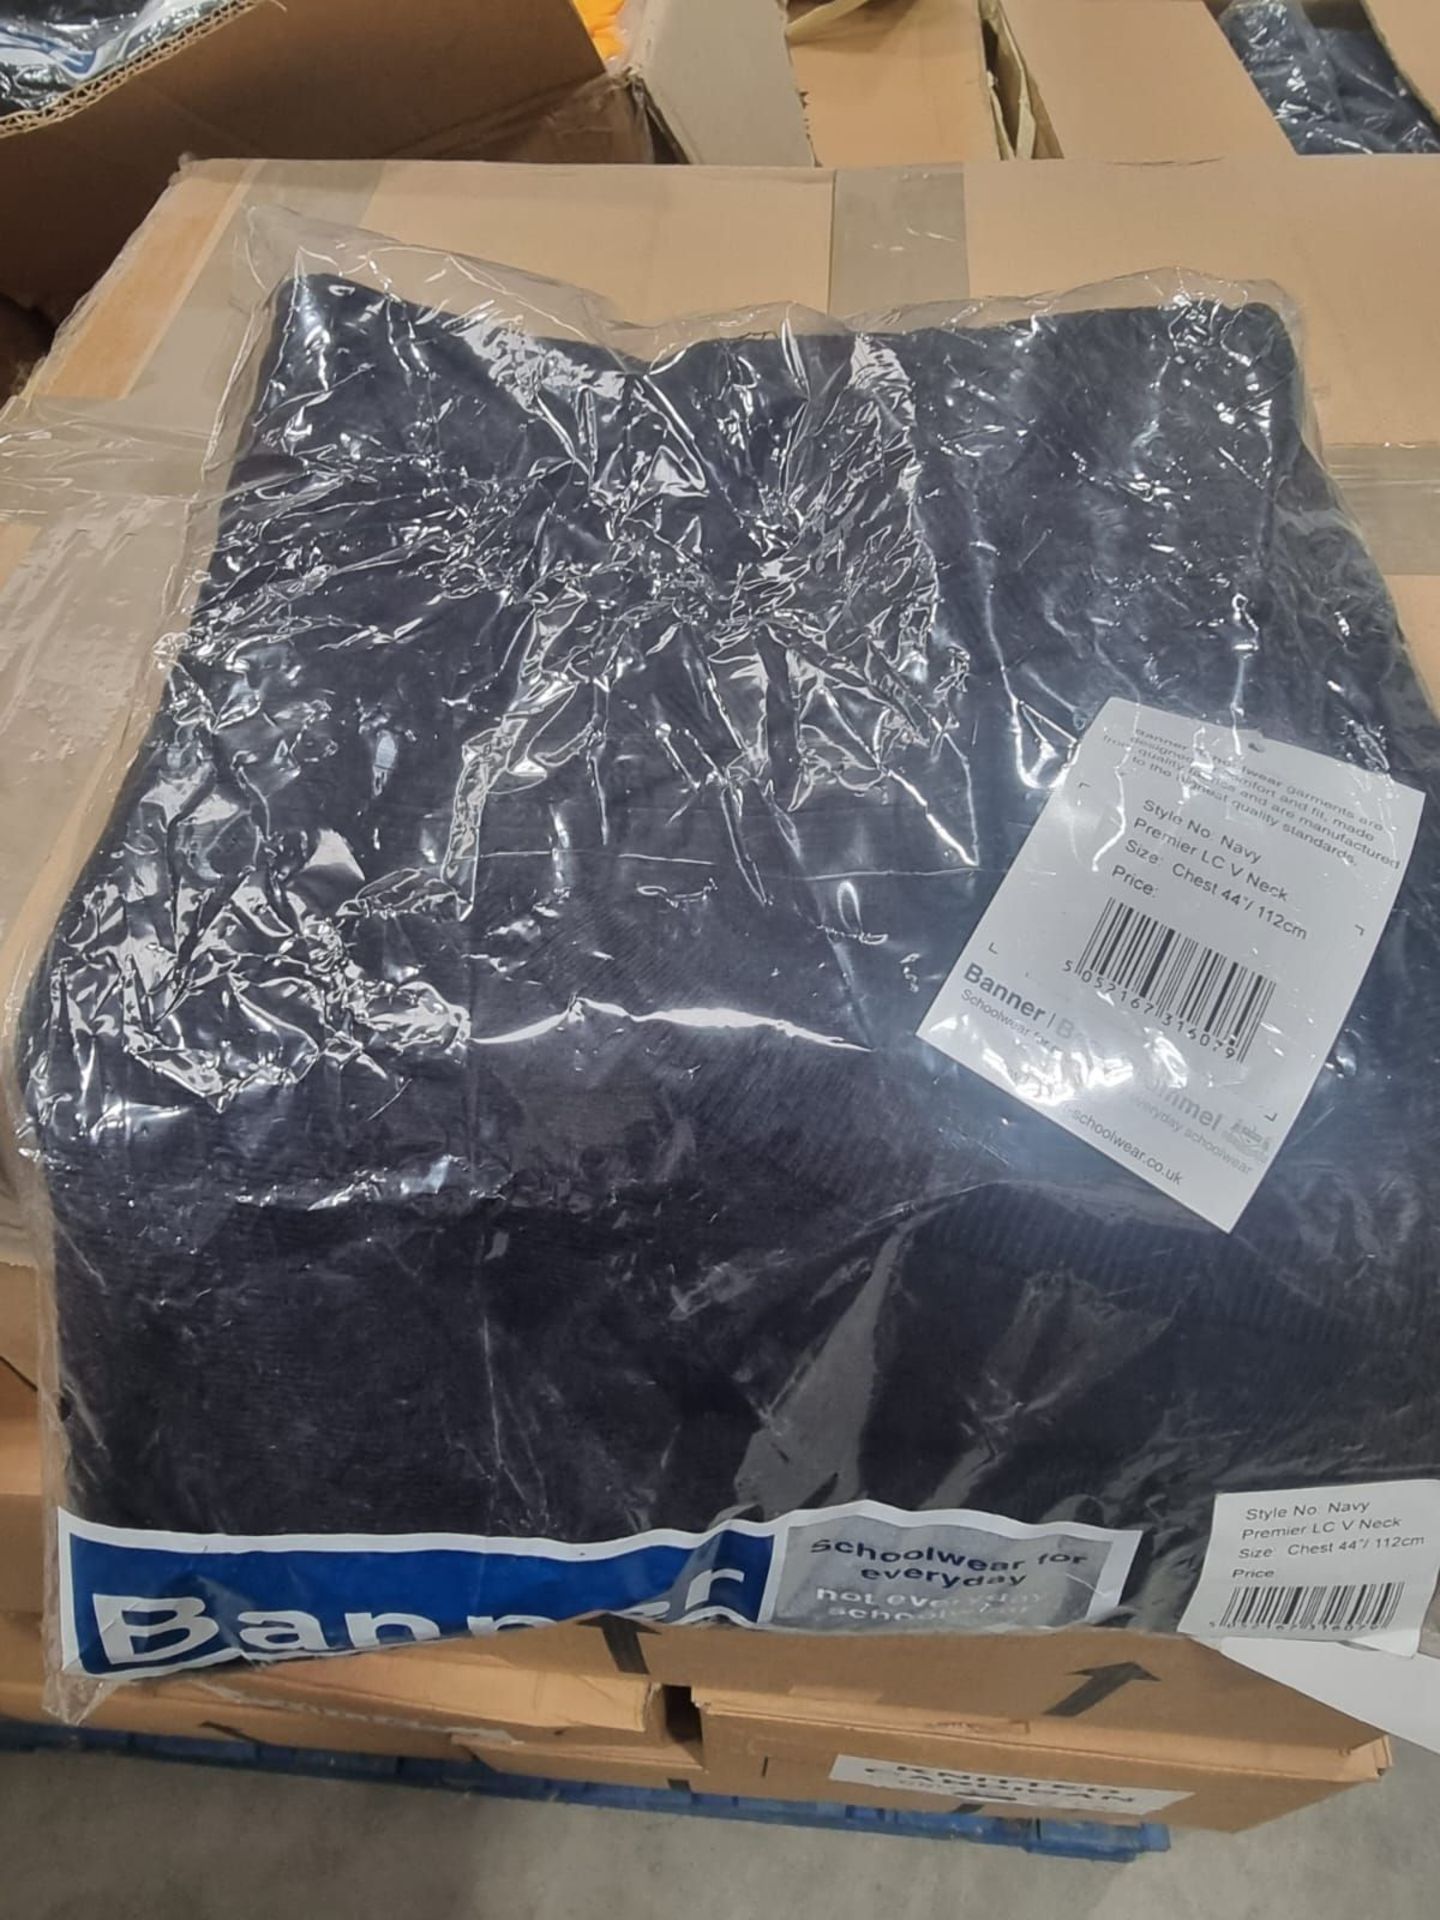 PALLET TO CONTAIN A LARGE QUANTITY OF NEW CLOTHING GOODS. MAY INCLUDE ITEMS SUCH AS: T-SHIRTS, - Image 19 of 28